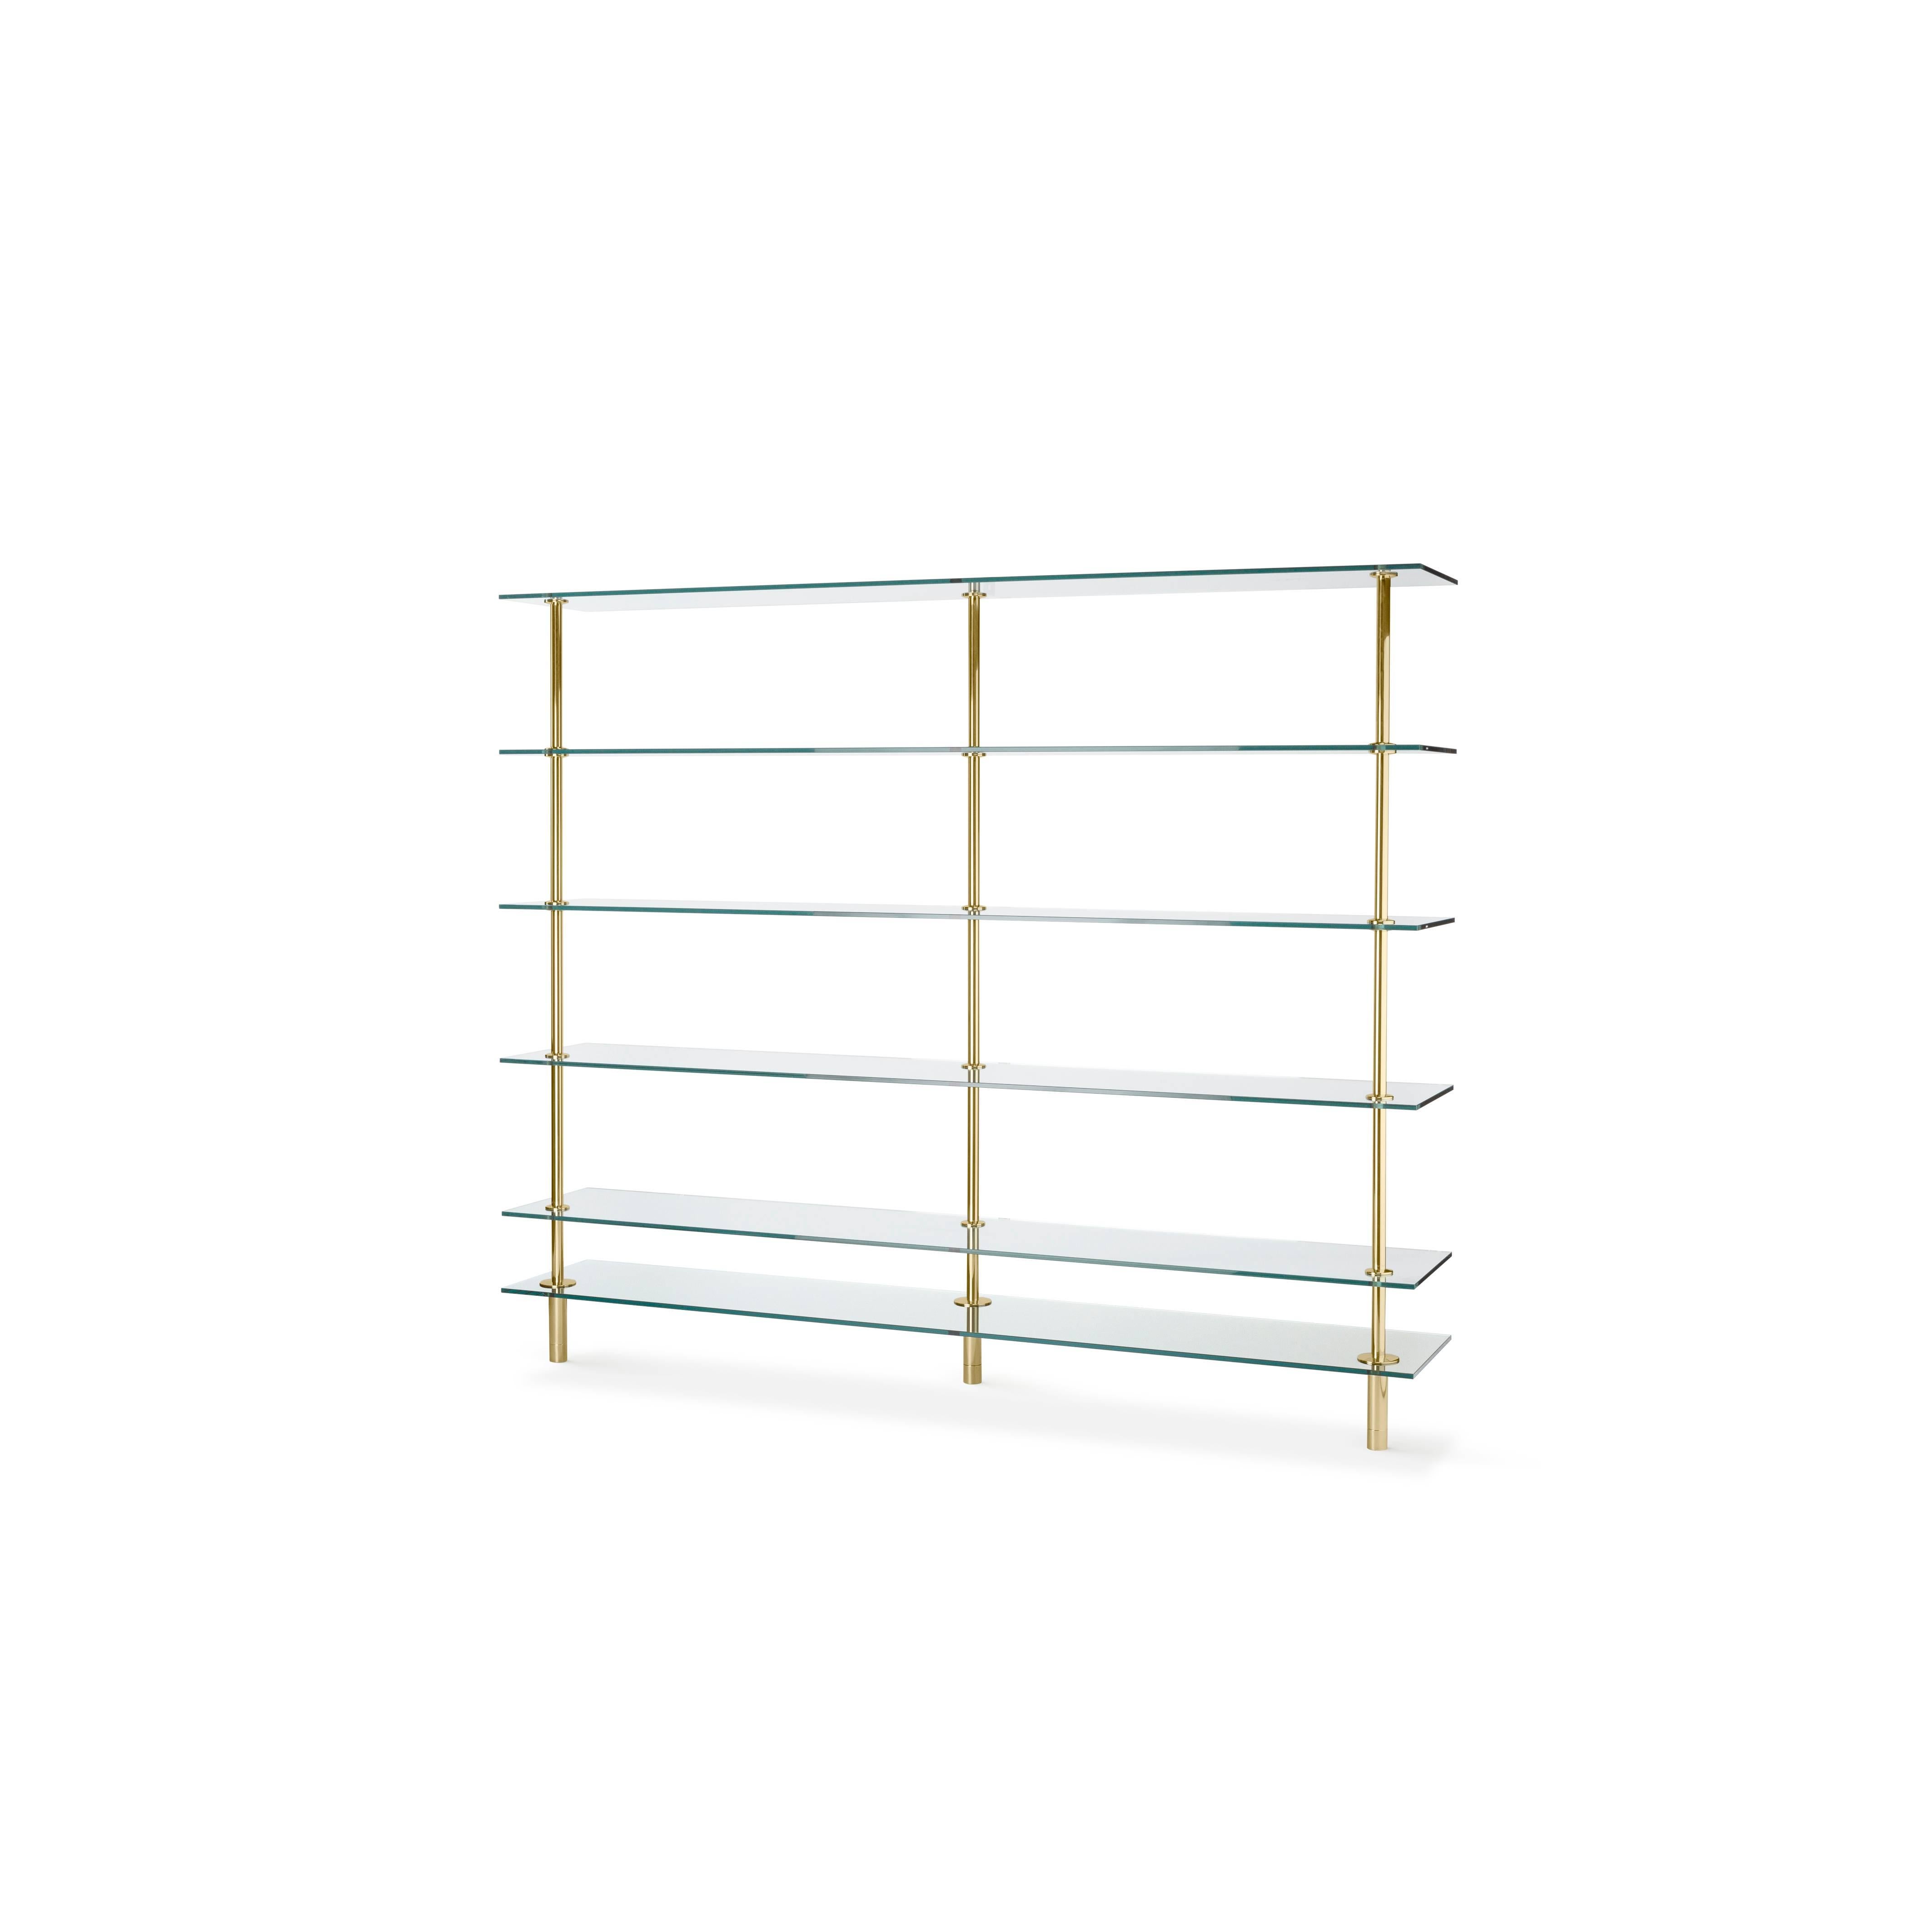 Legs bookcase polished brass and crystal designed by Paolo Rizzatto for Ghidini, 1961.

Measures: 225 x 40 x 190 H cm.